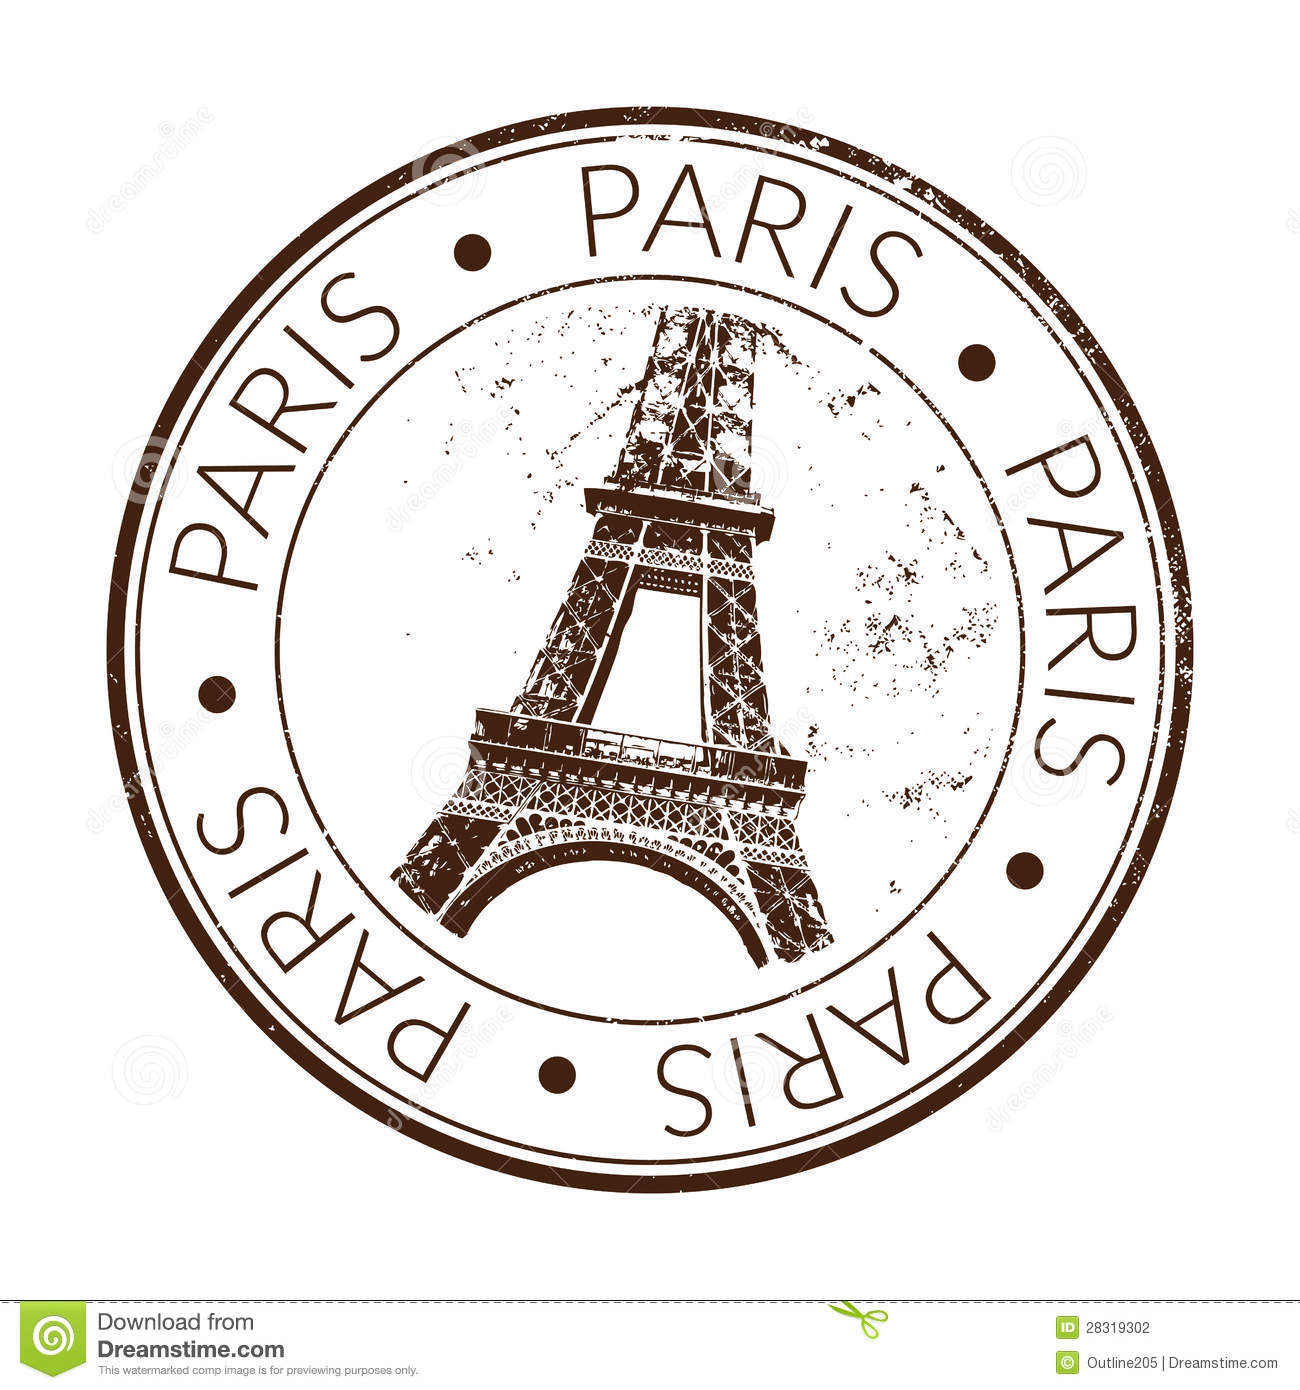 Aged Rubber Stamp Of Paris With Eiffel Tower In Middle